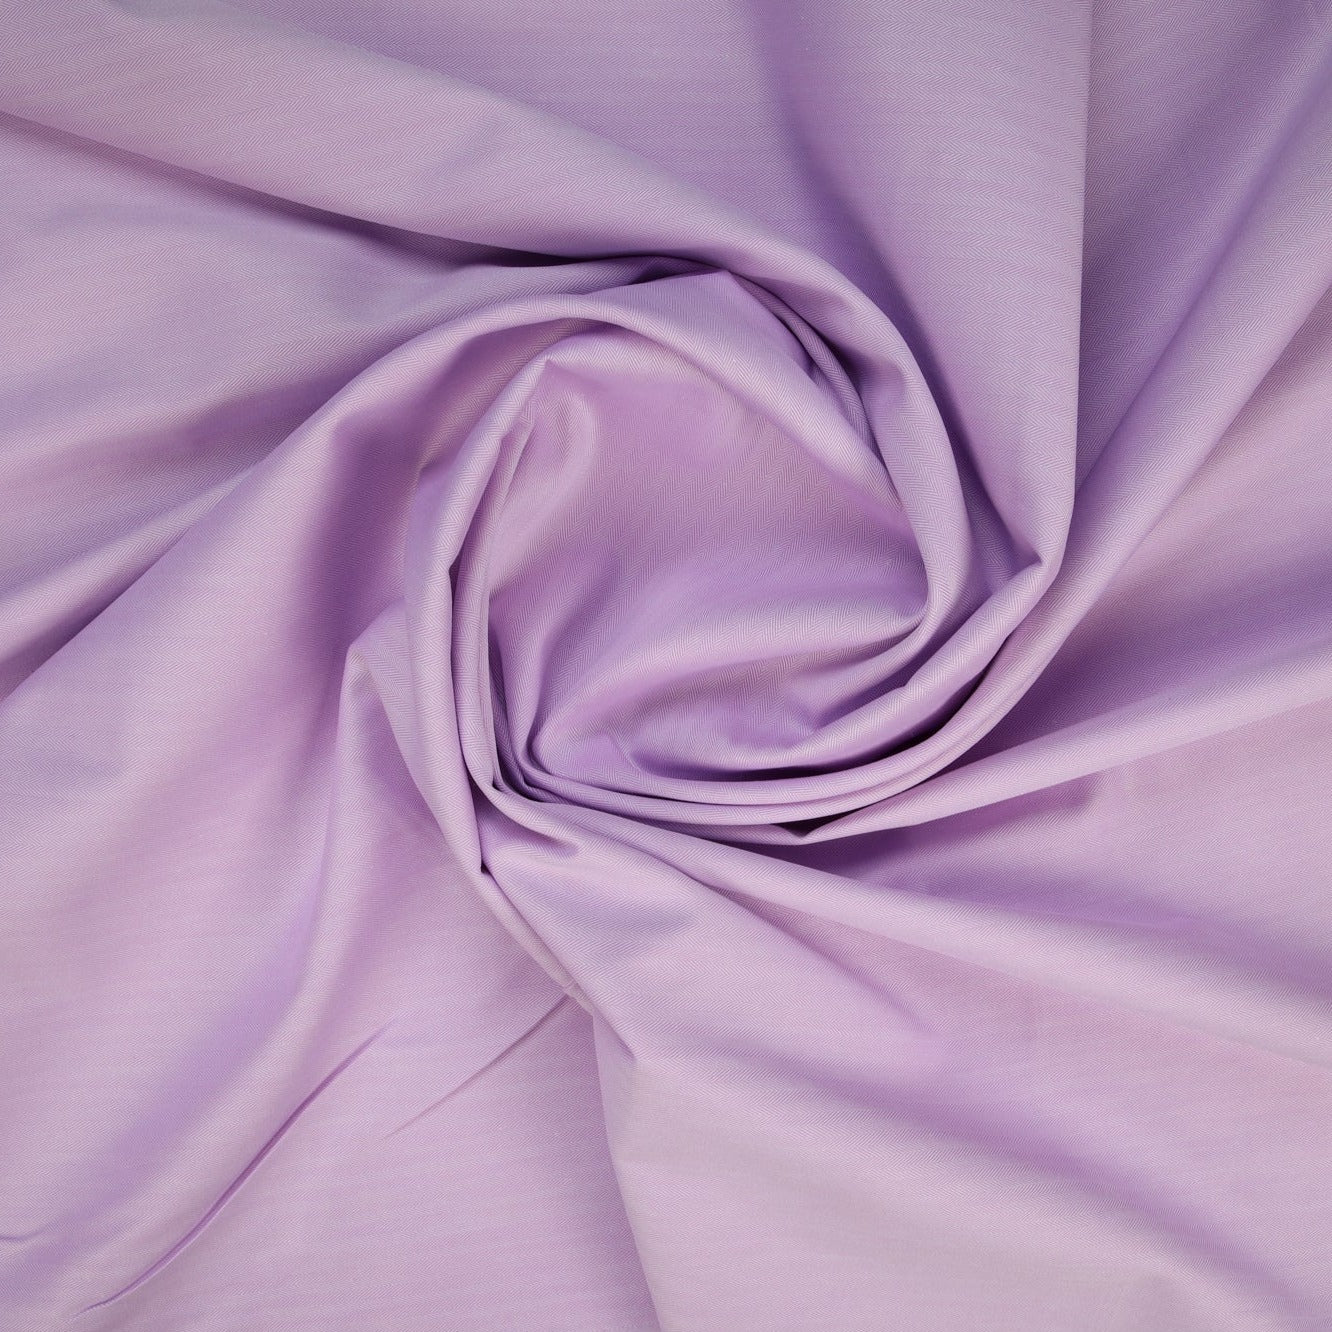 Plain Hosiery cotton Fabric, for Shirting Purpose at Rs 400